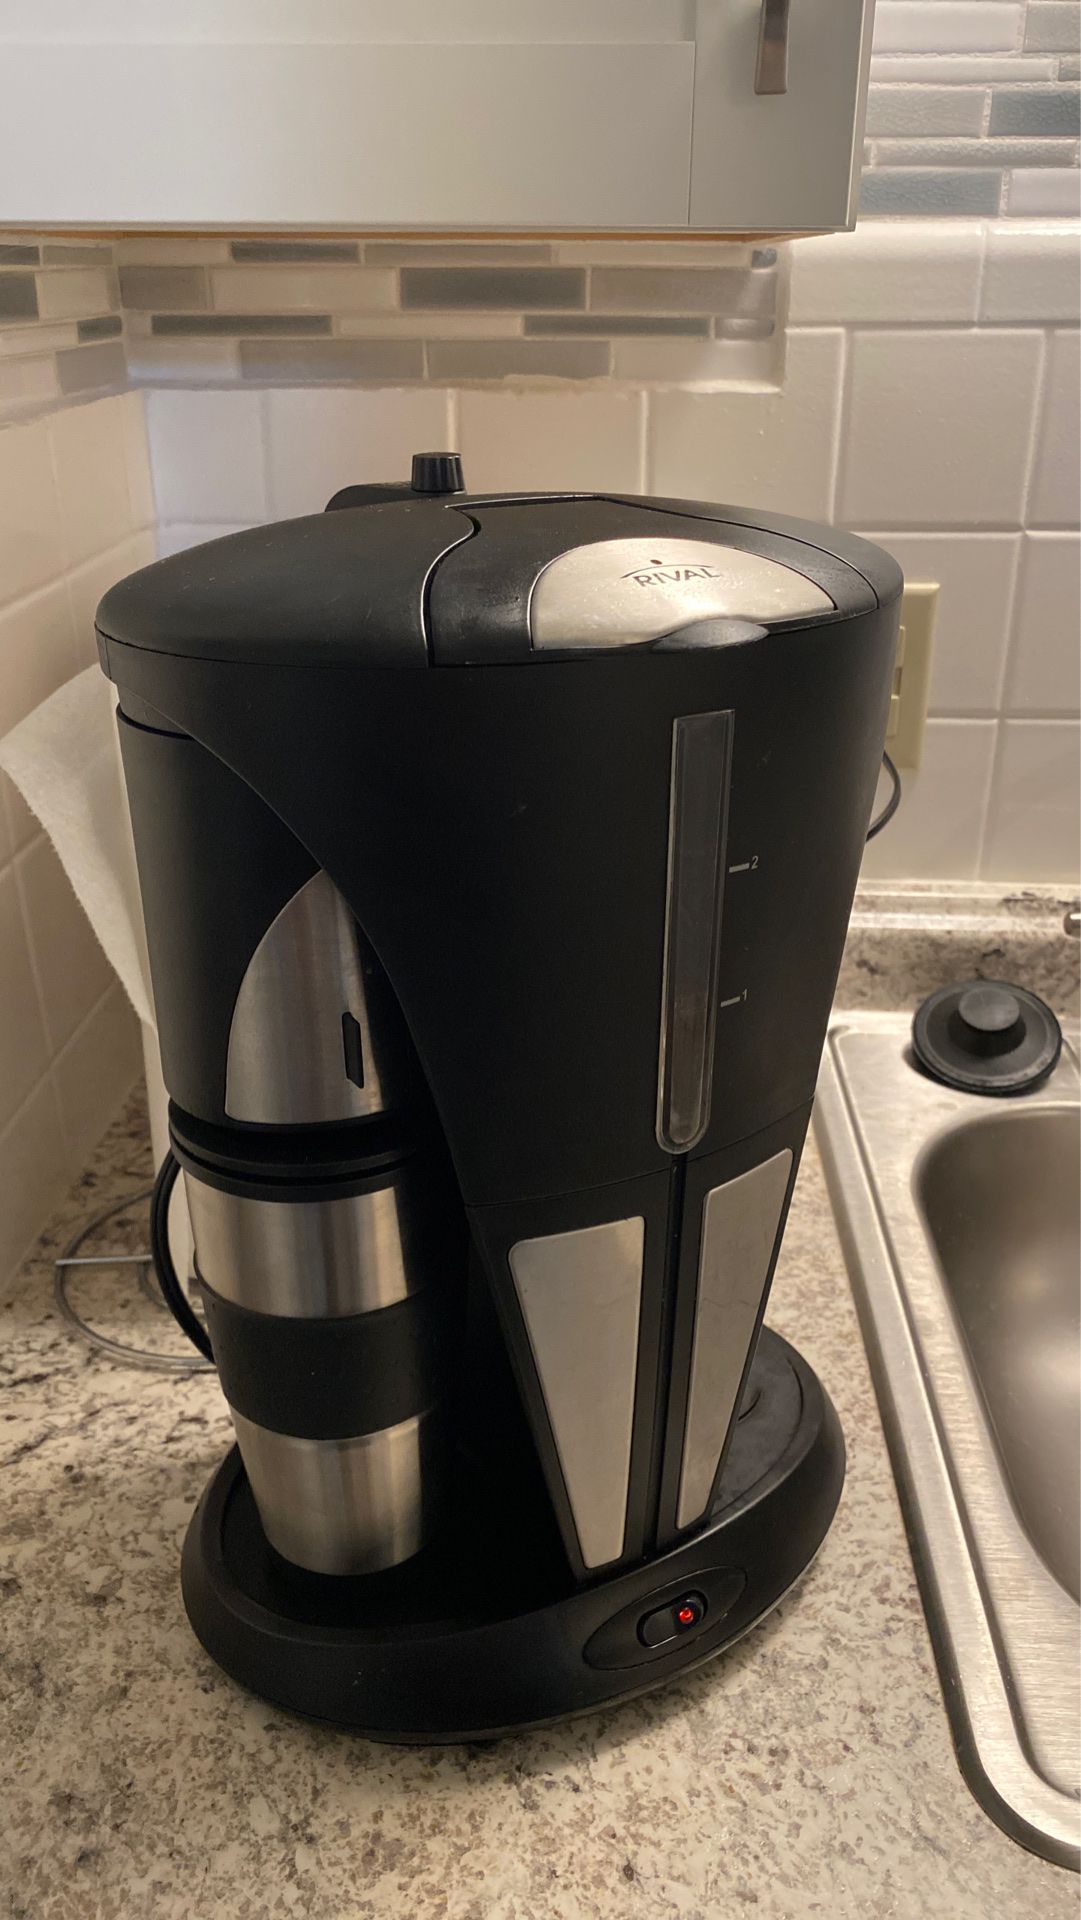 Rival duel coffee maker